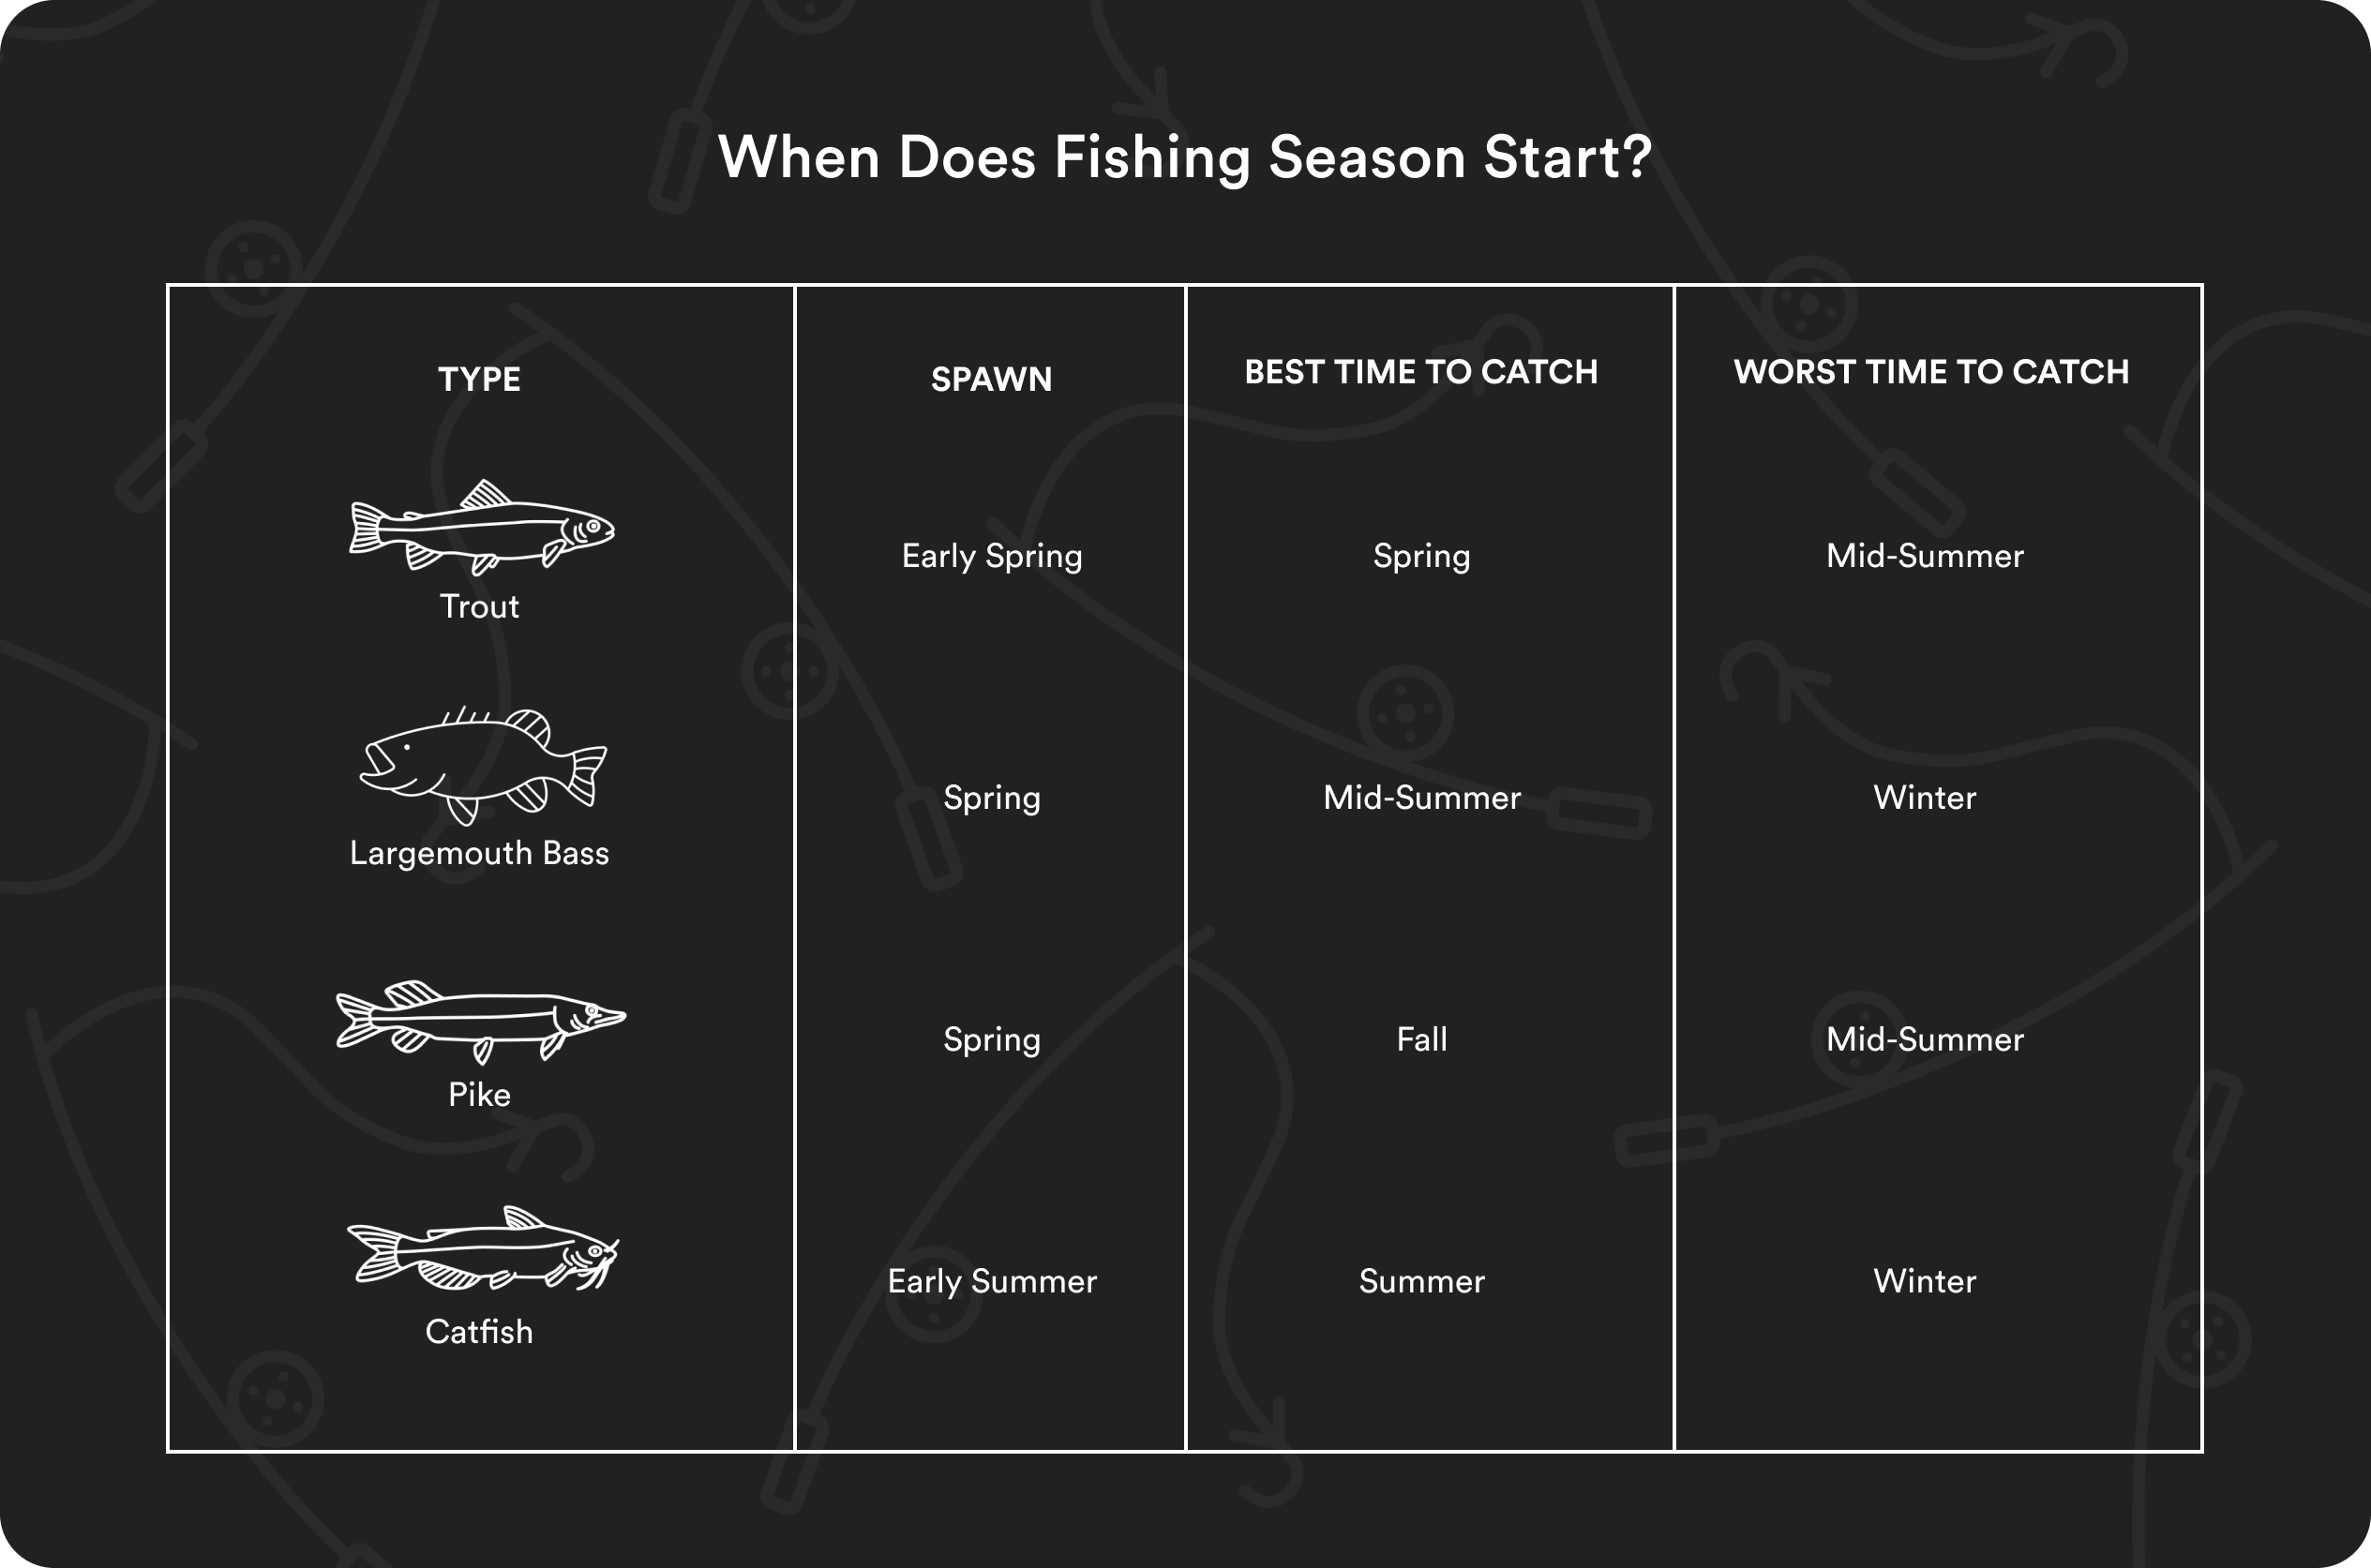 An image that explains the best time to fish for trout, largemouth bass, pike, and catfish.